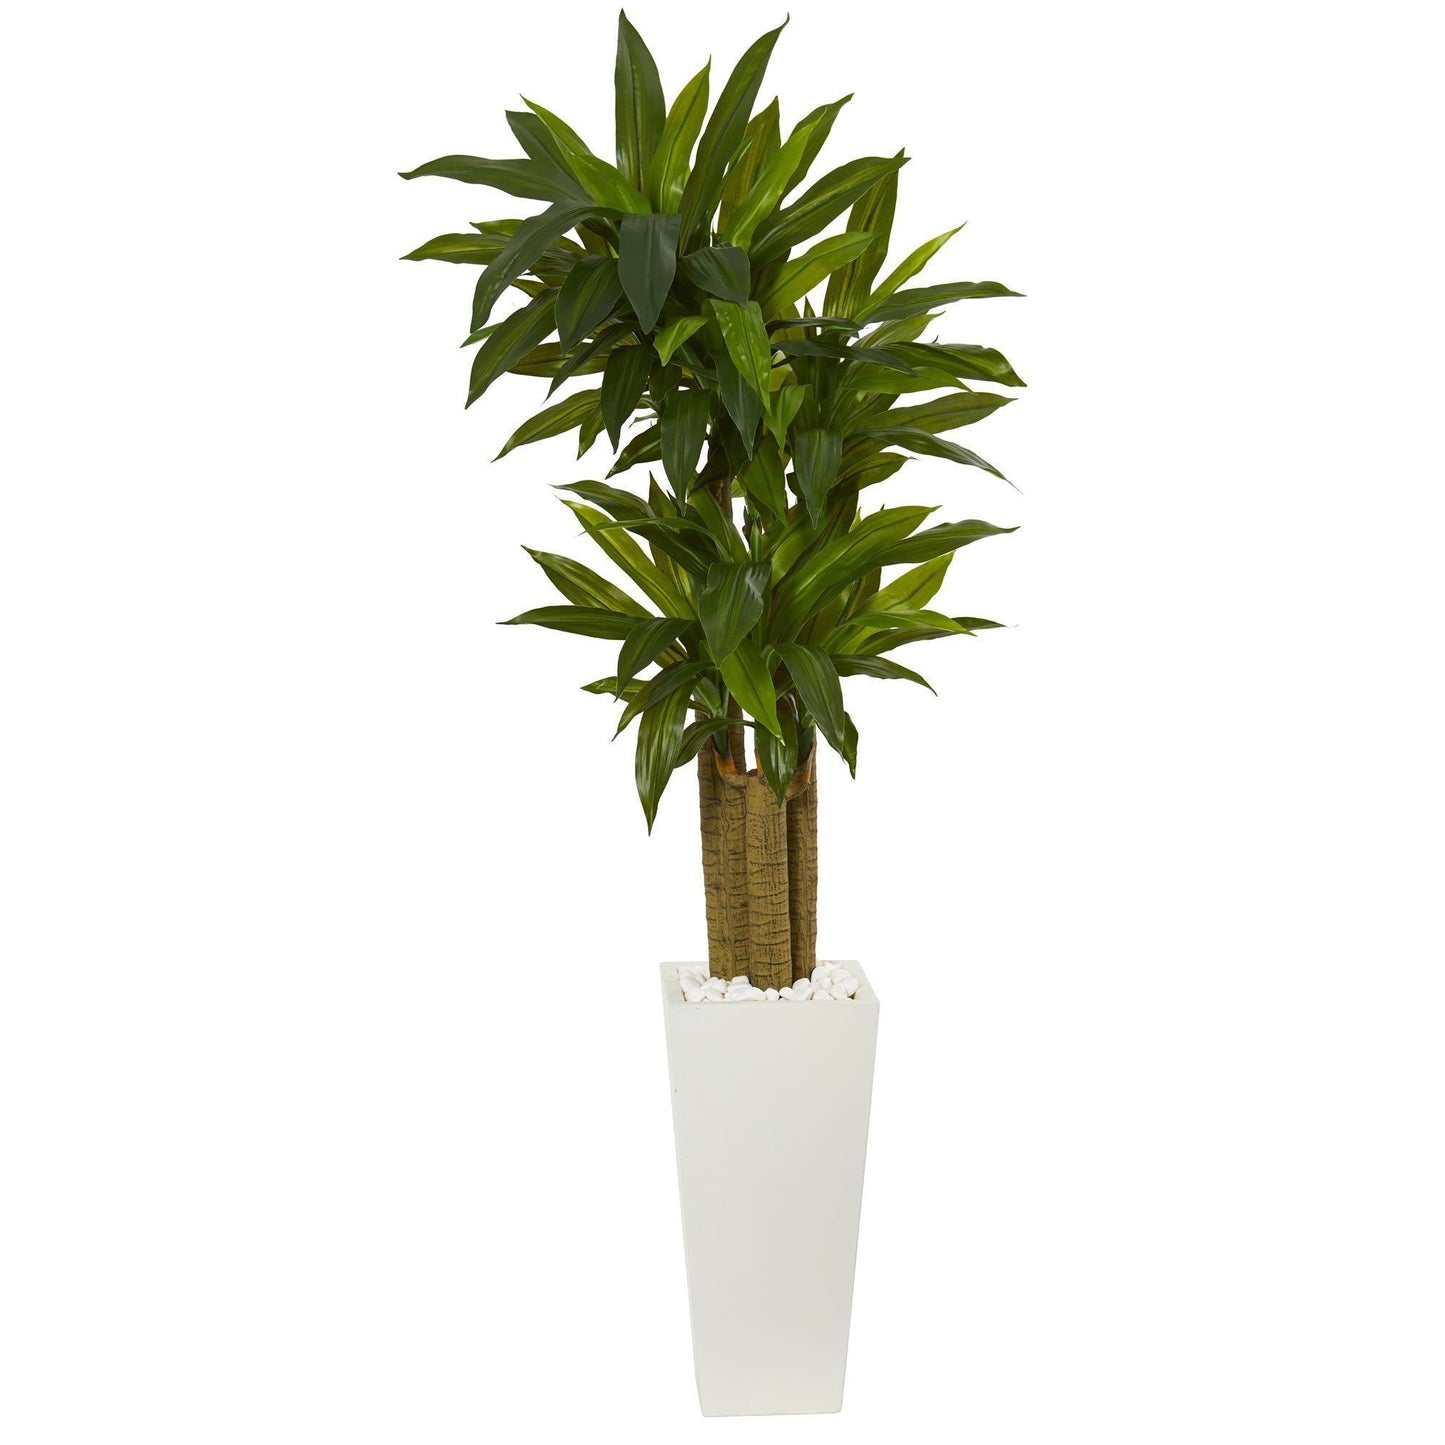 5' Cornstalk Dracaena Artificial Plant in White Tower Planter by Nearly Natural